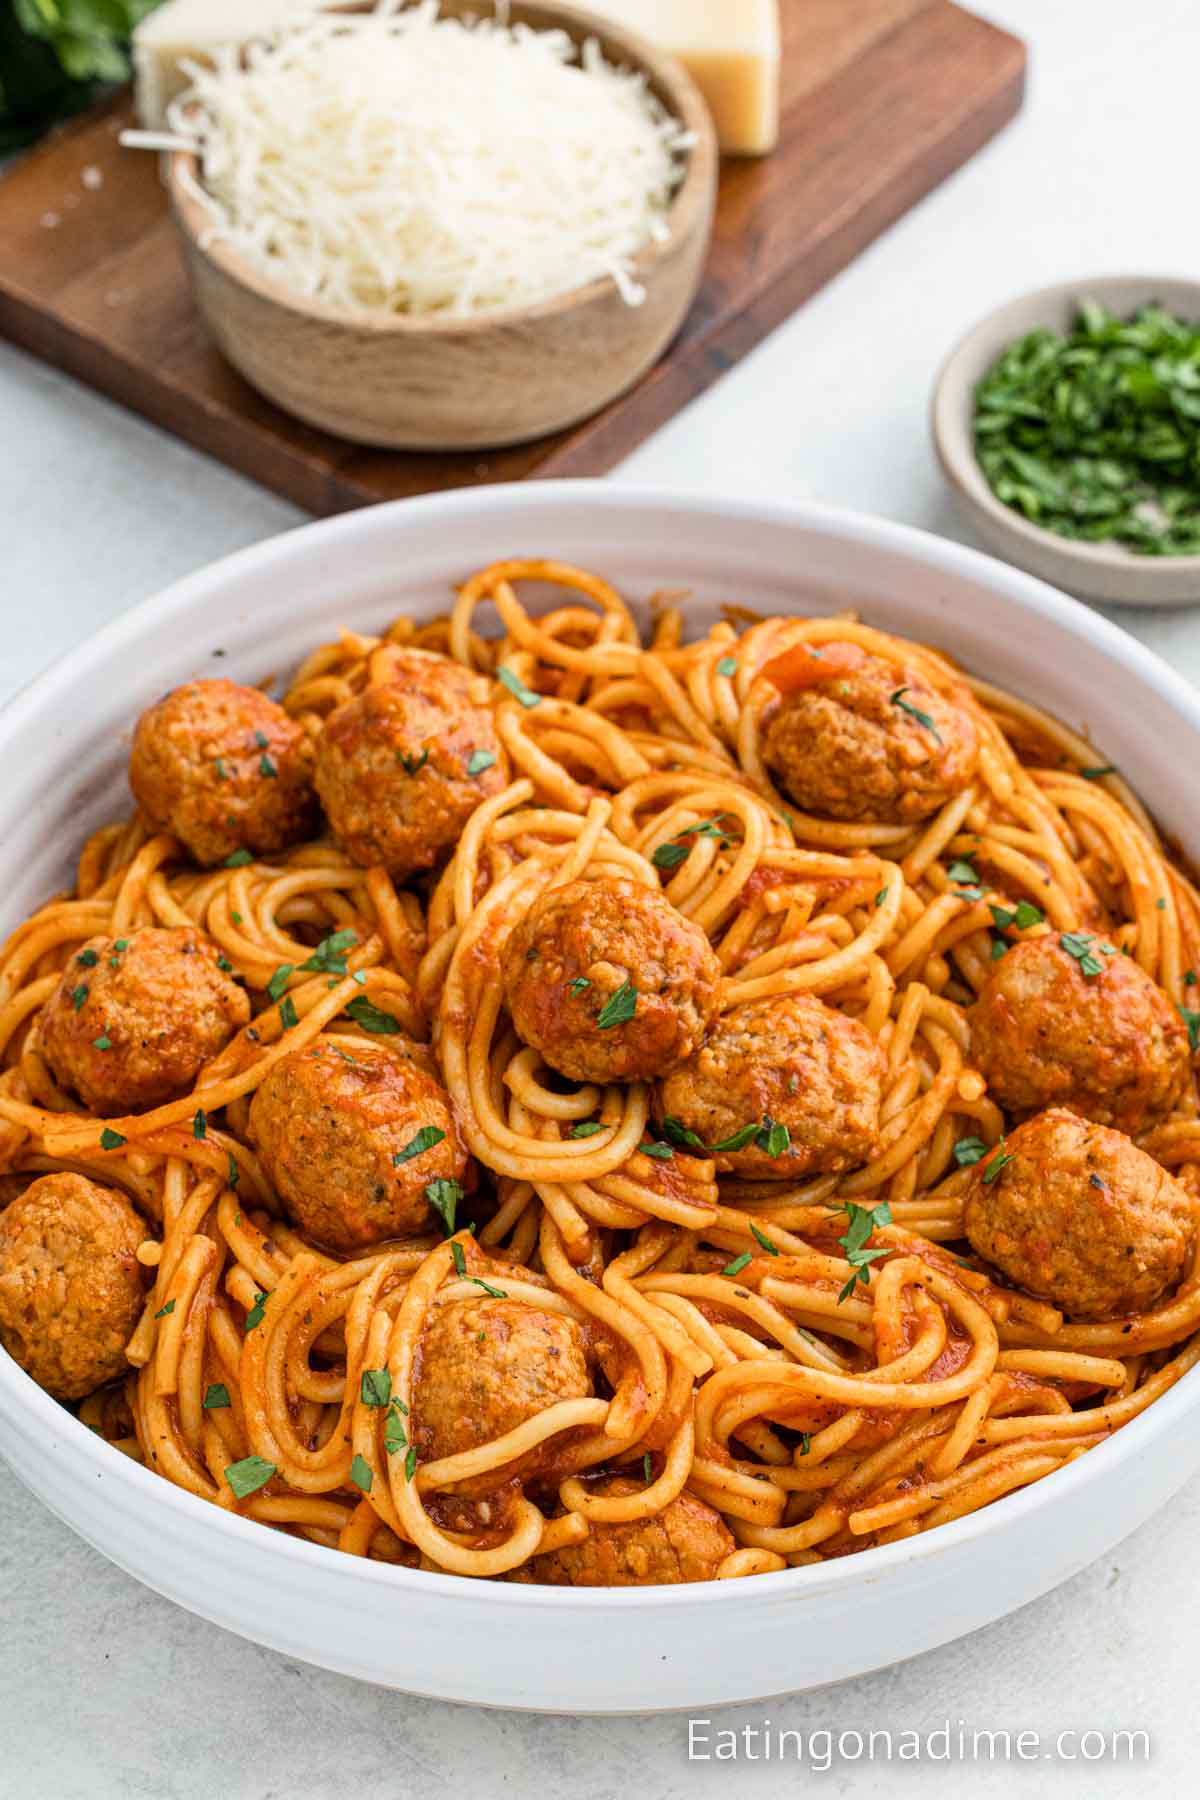 Spaghetti and Meatballs in a bowl